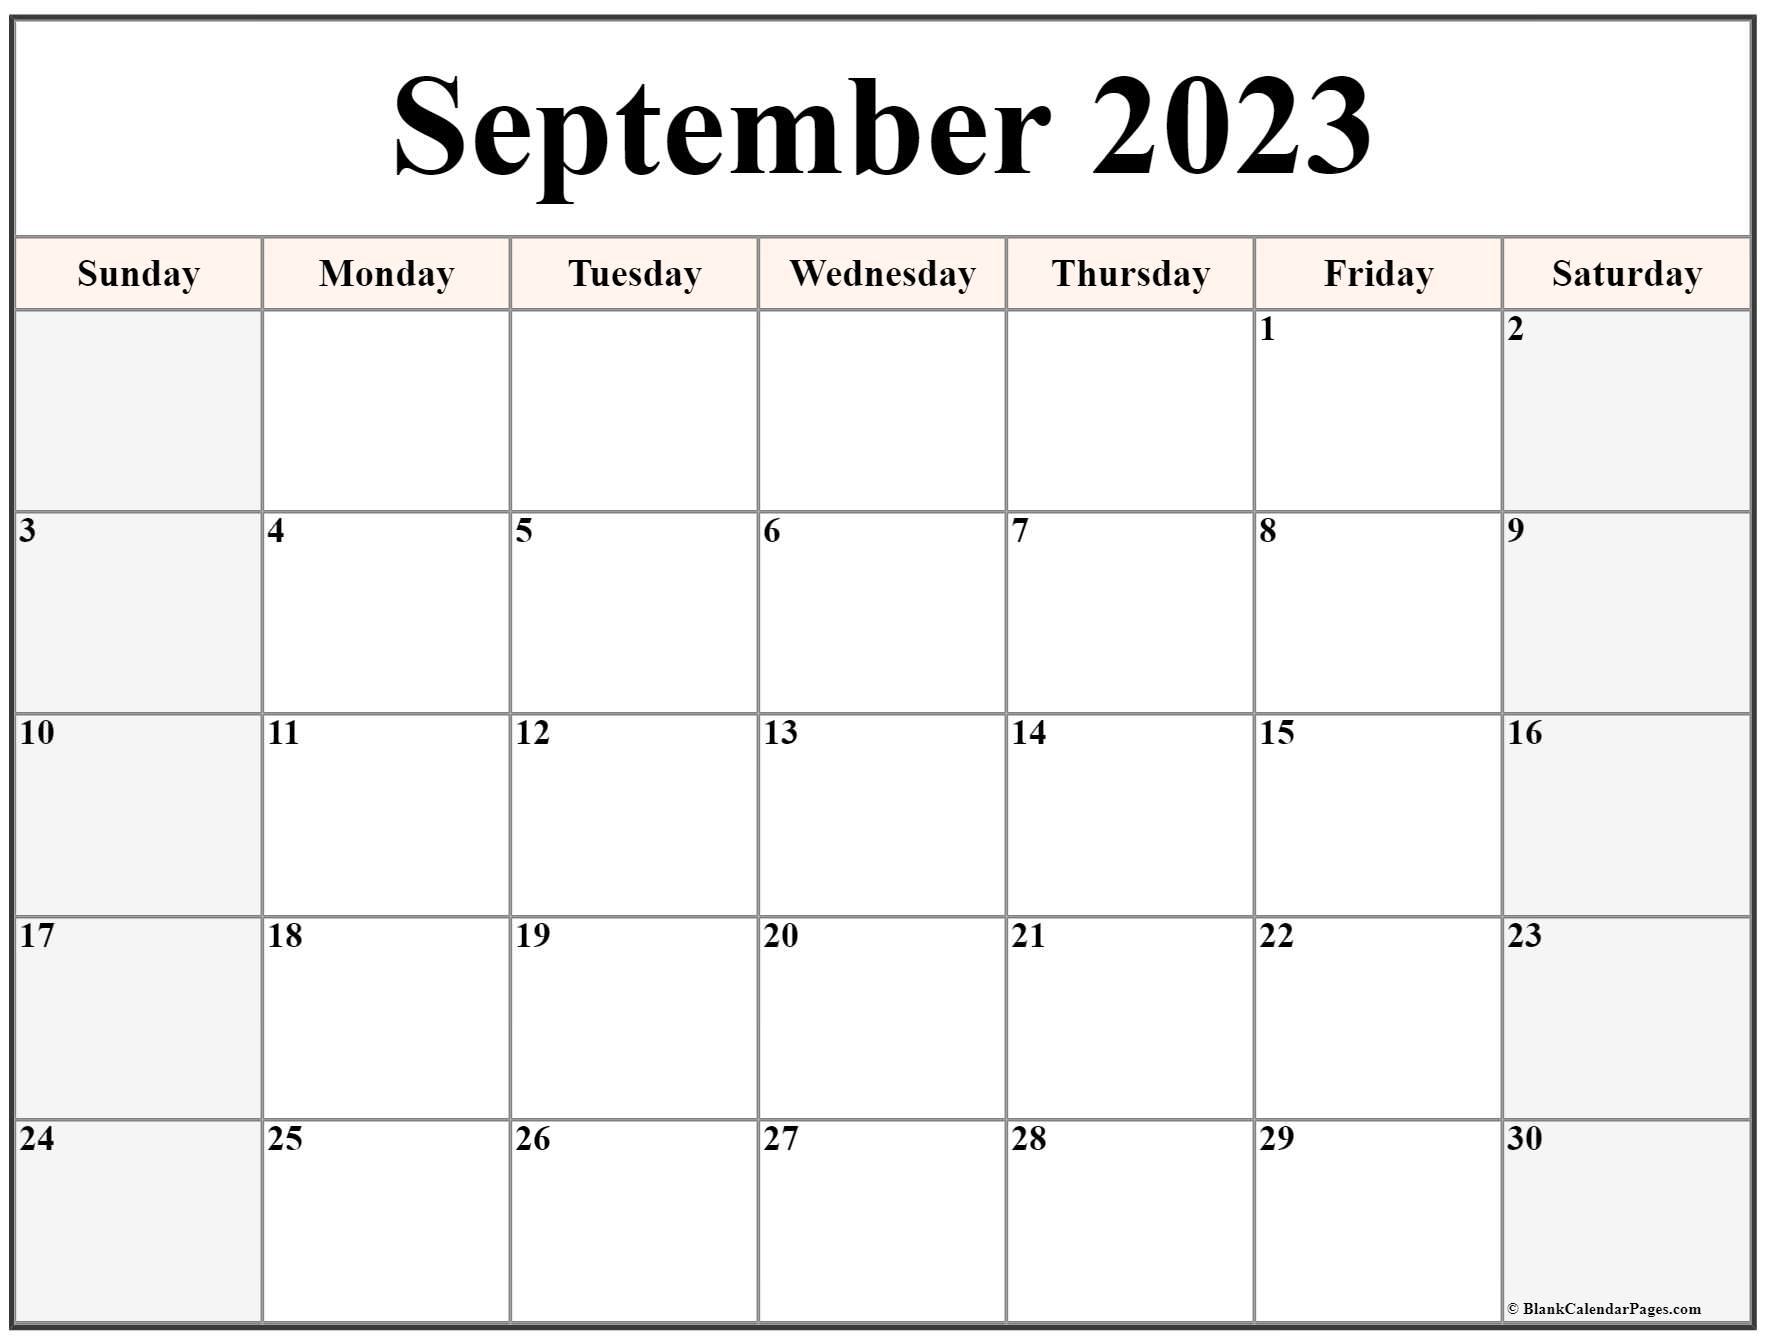 Get Ready For The Month Of September With A 2023 Printable Calendar Creyentes Diverses News